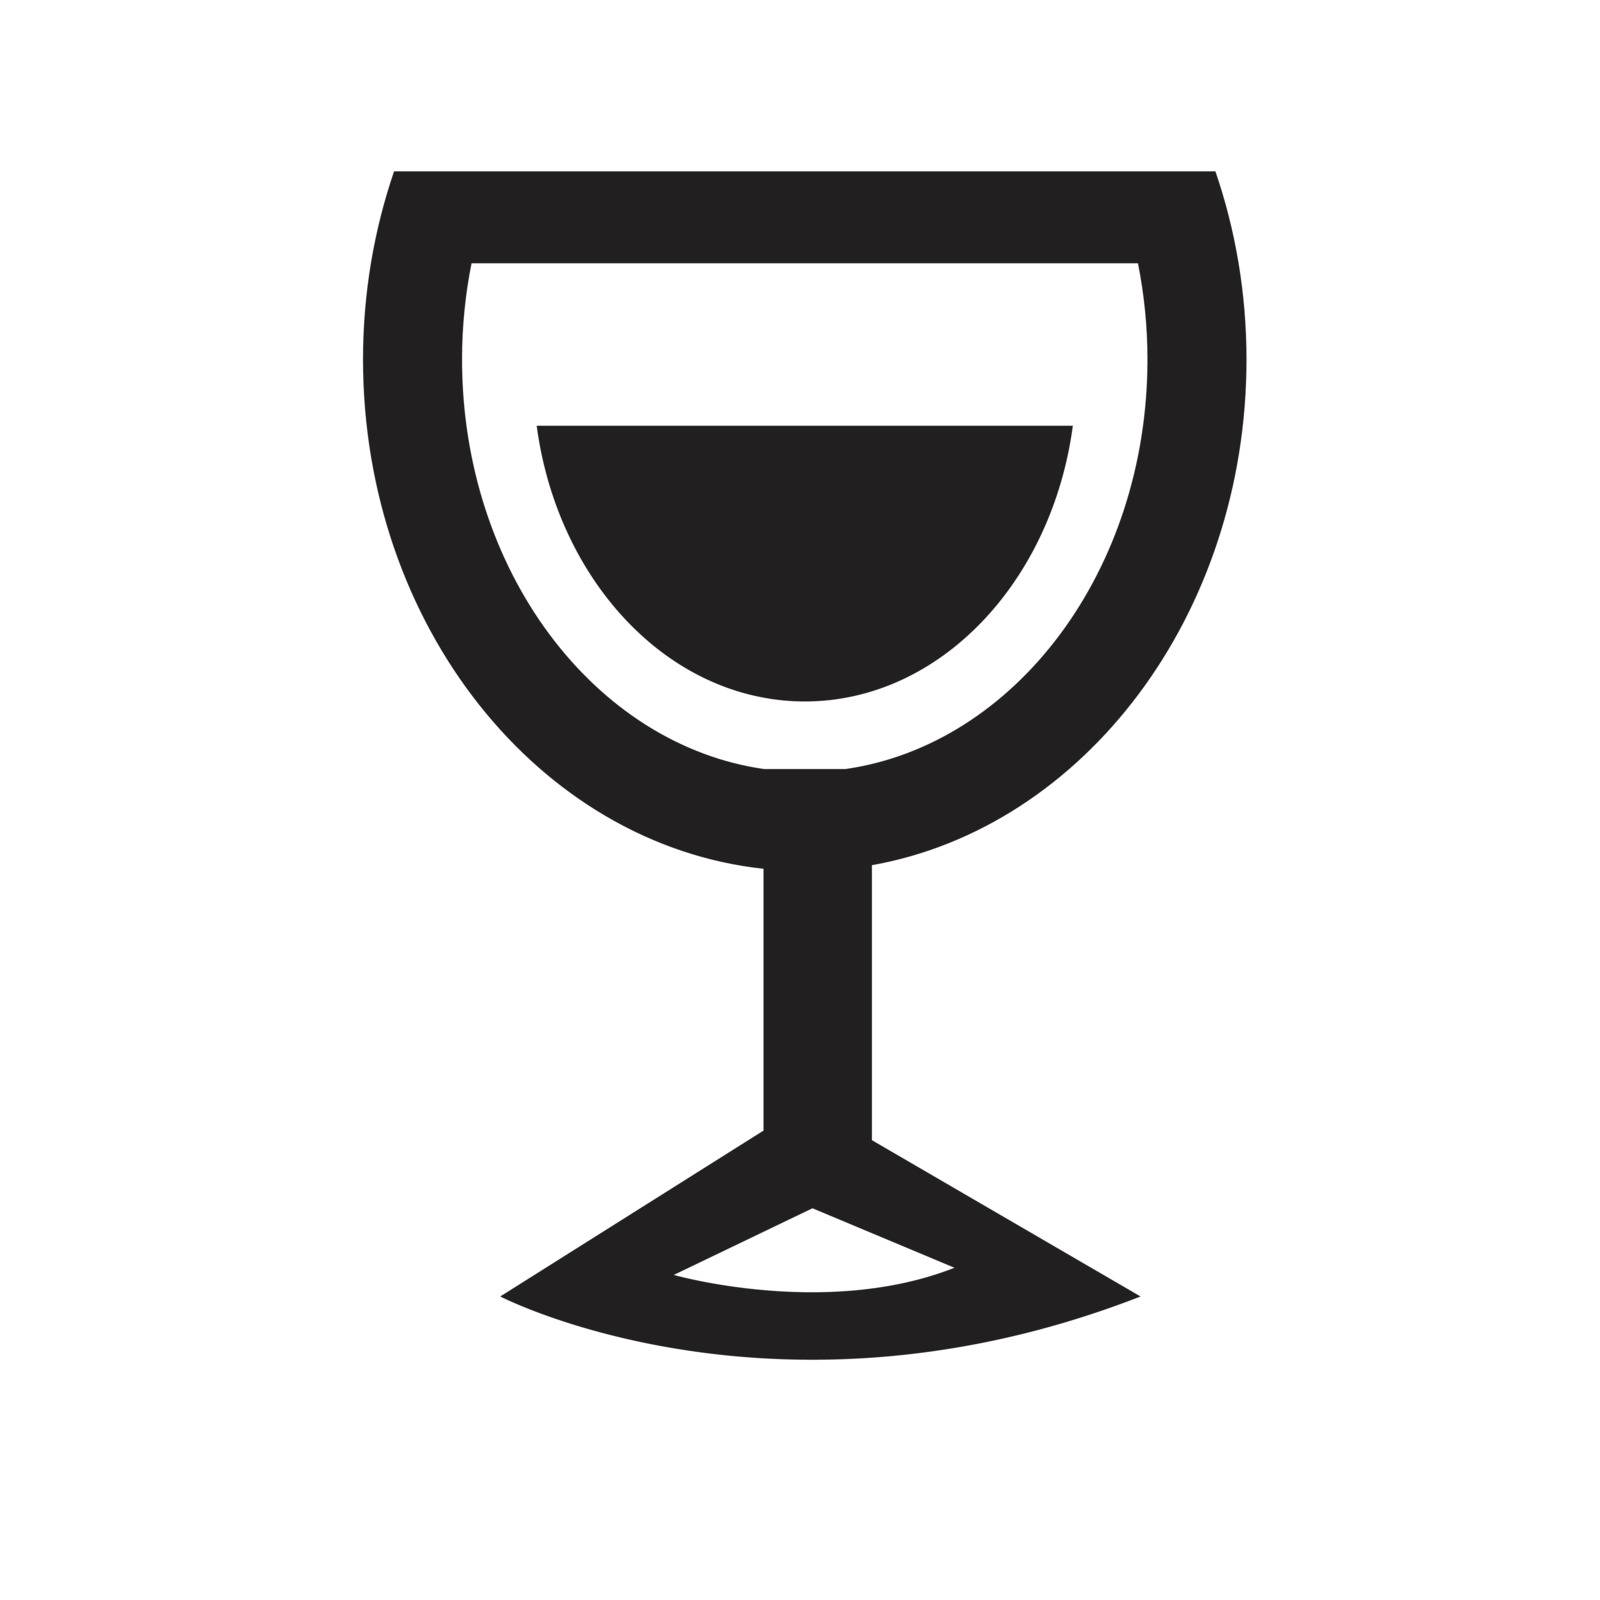 Drink alcohol beverage icons by iconmama